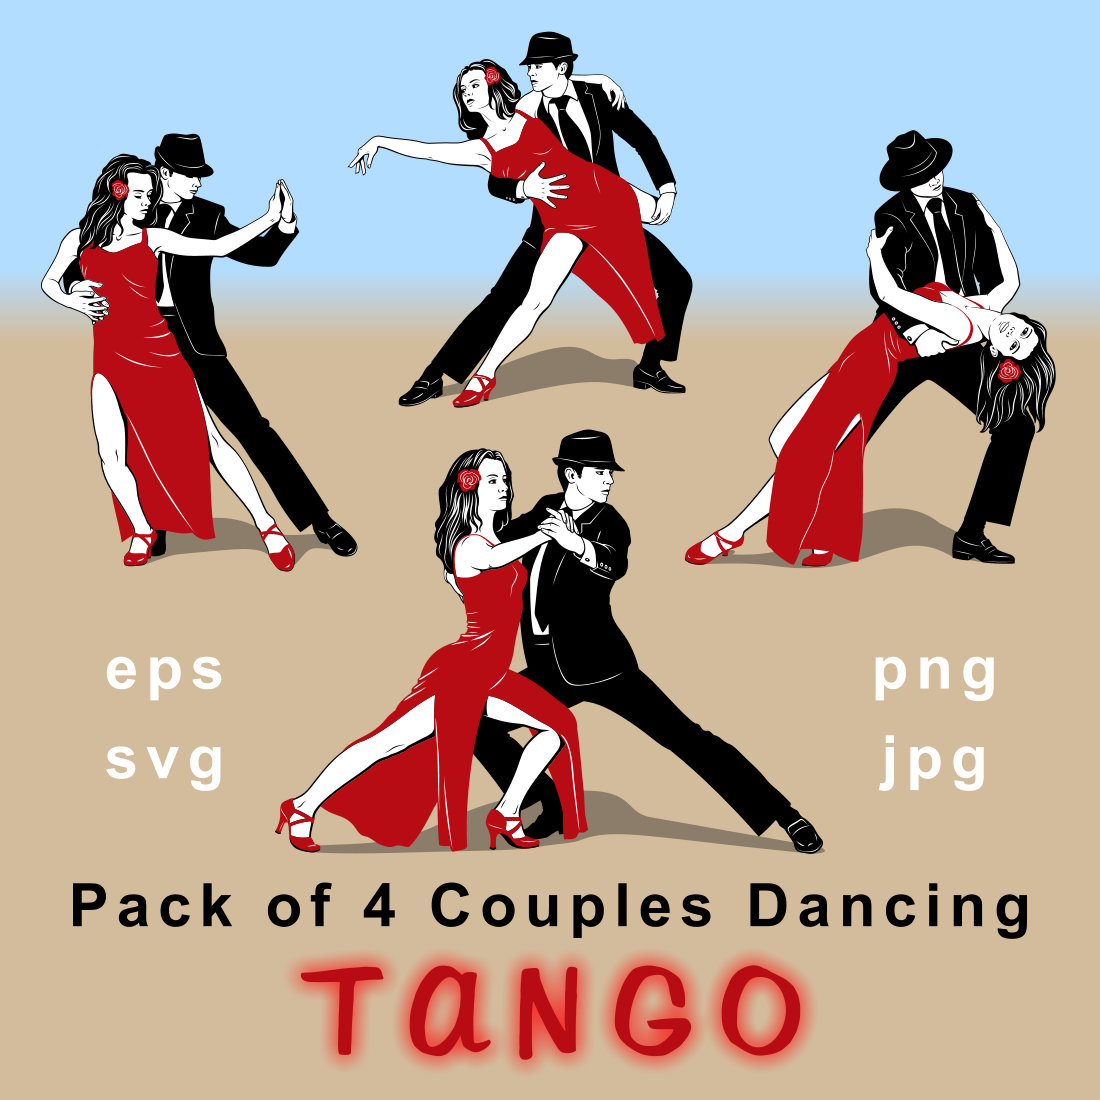 Couples Dancing Tango Designs cover image.